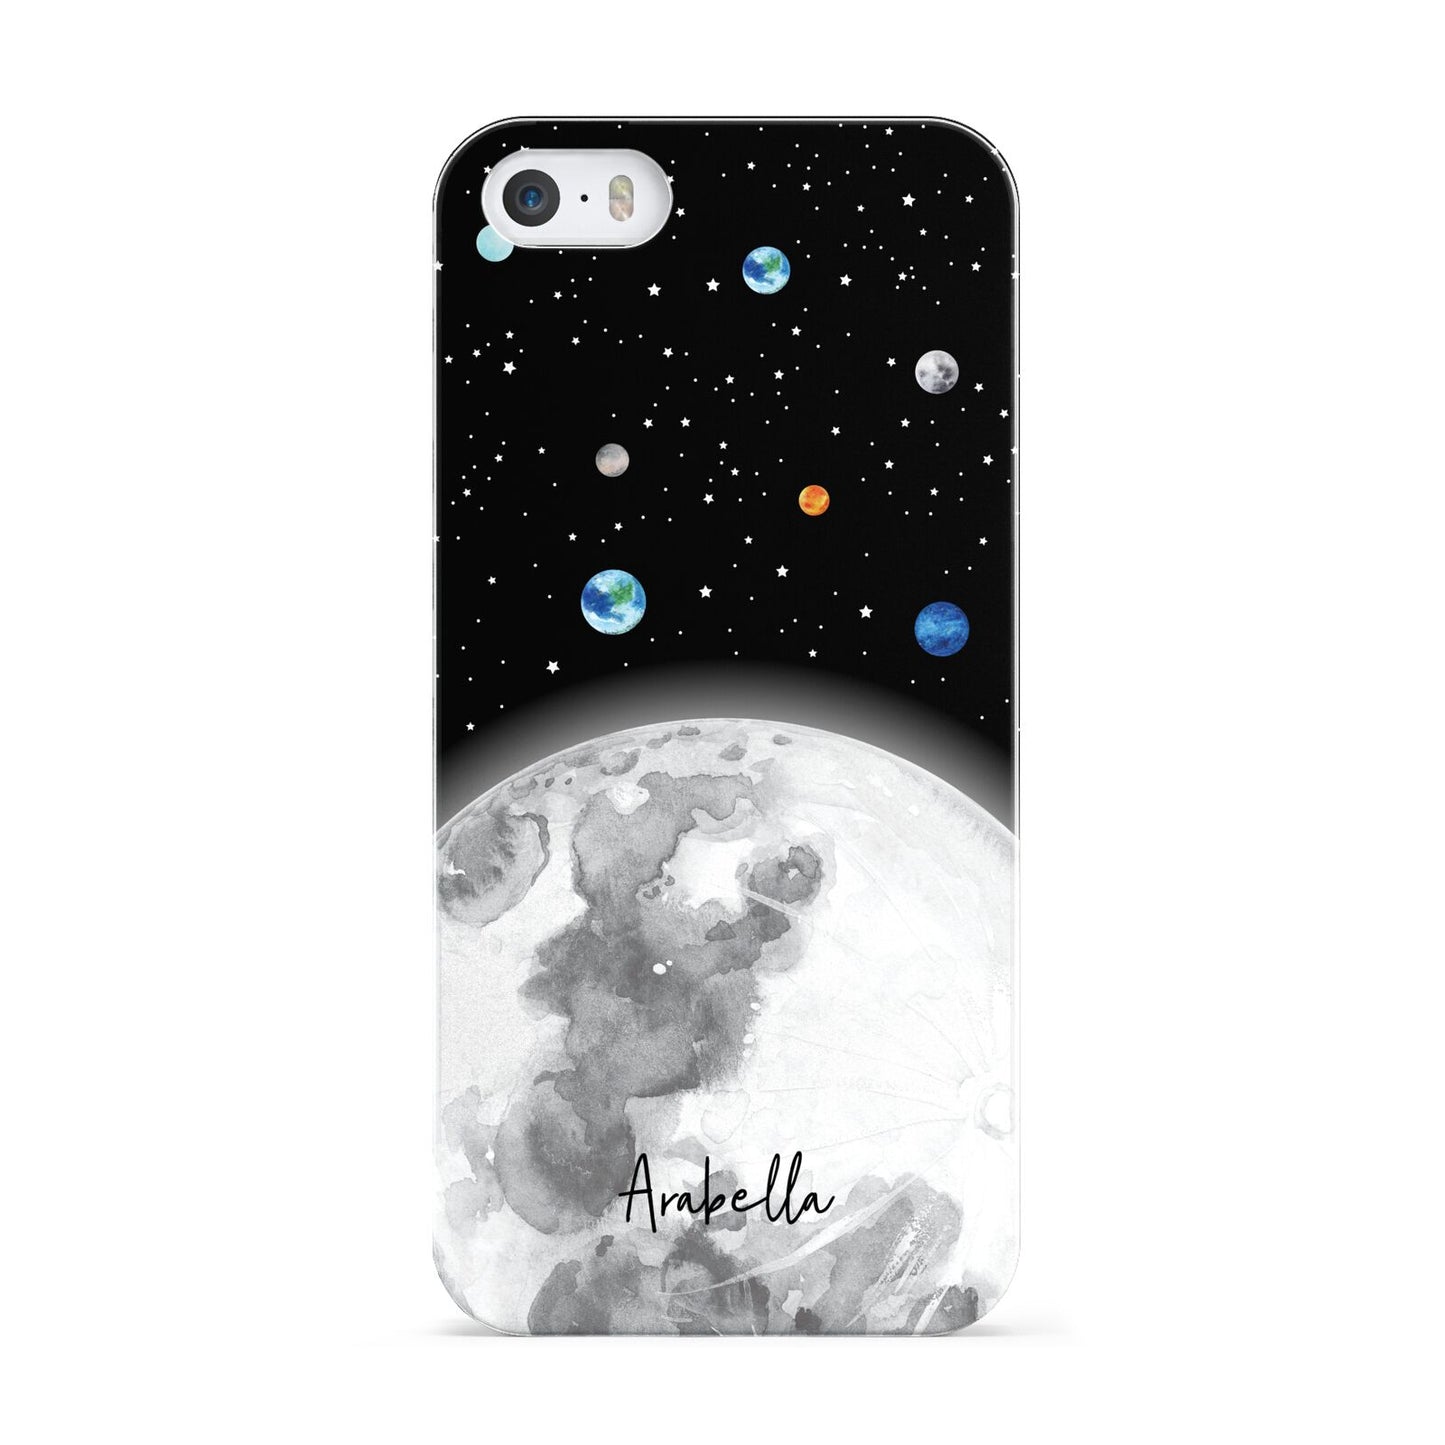 Watercolour Close up Moon with Name Apple iPhone 5 Case